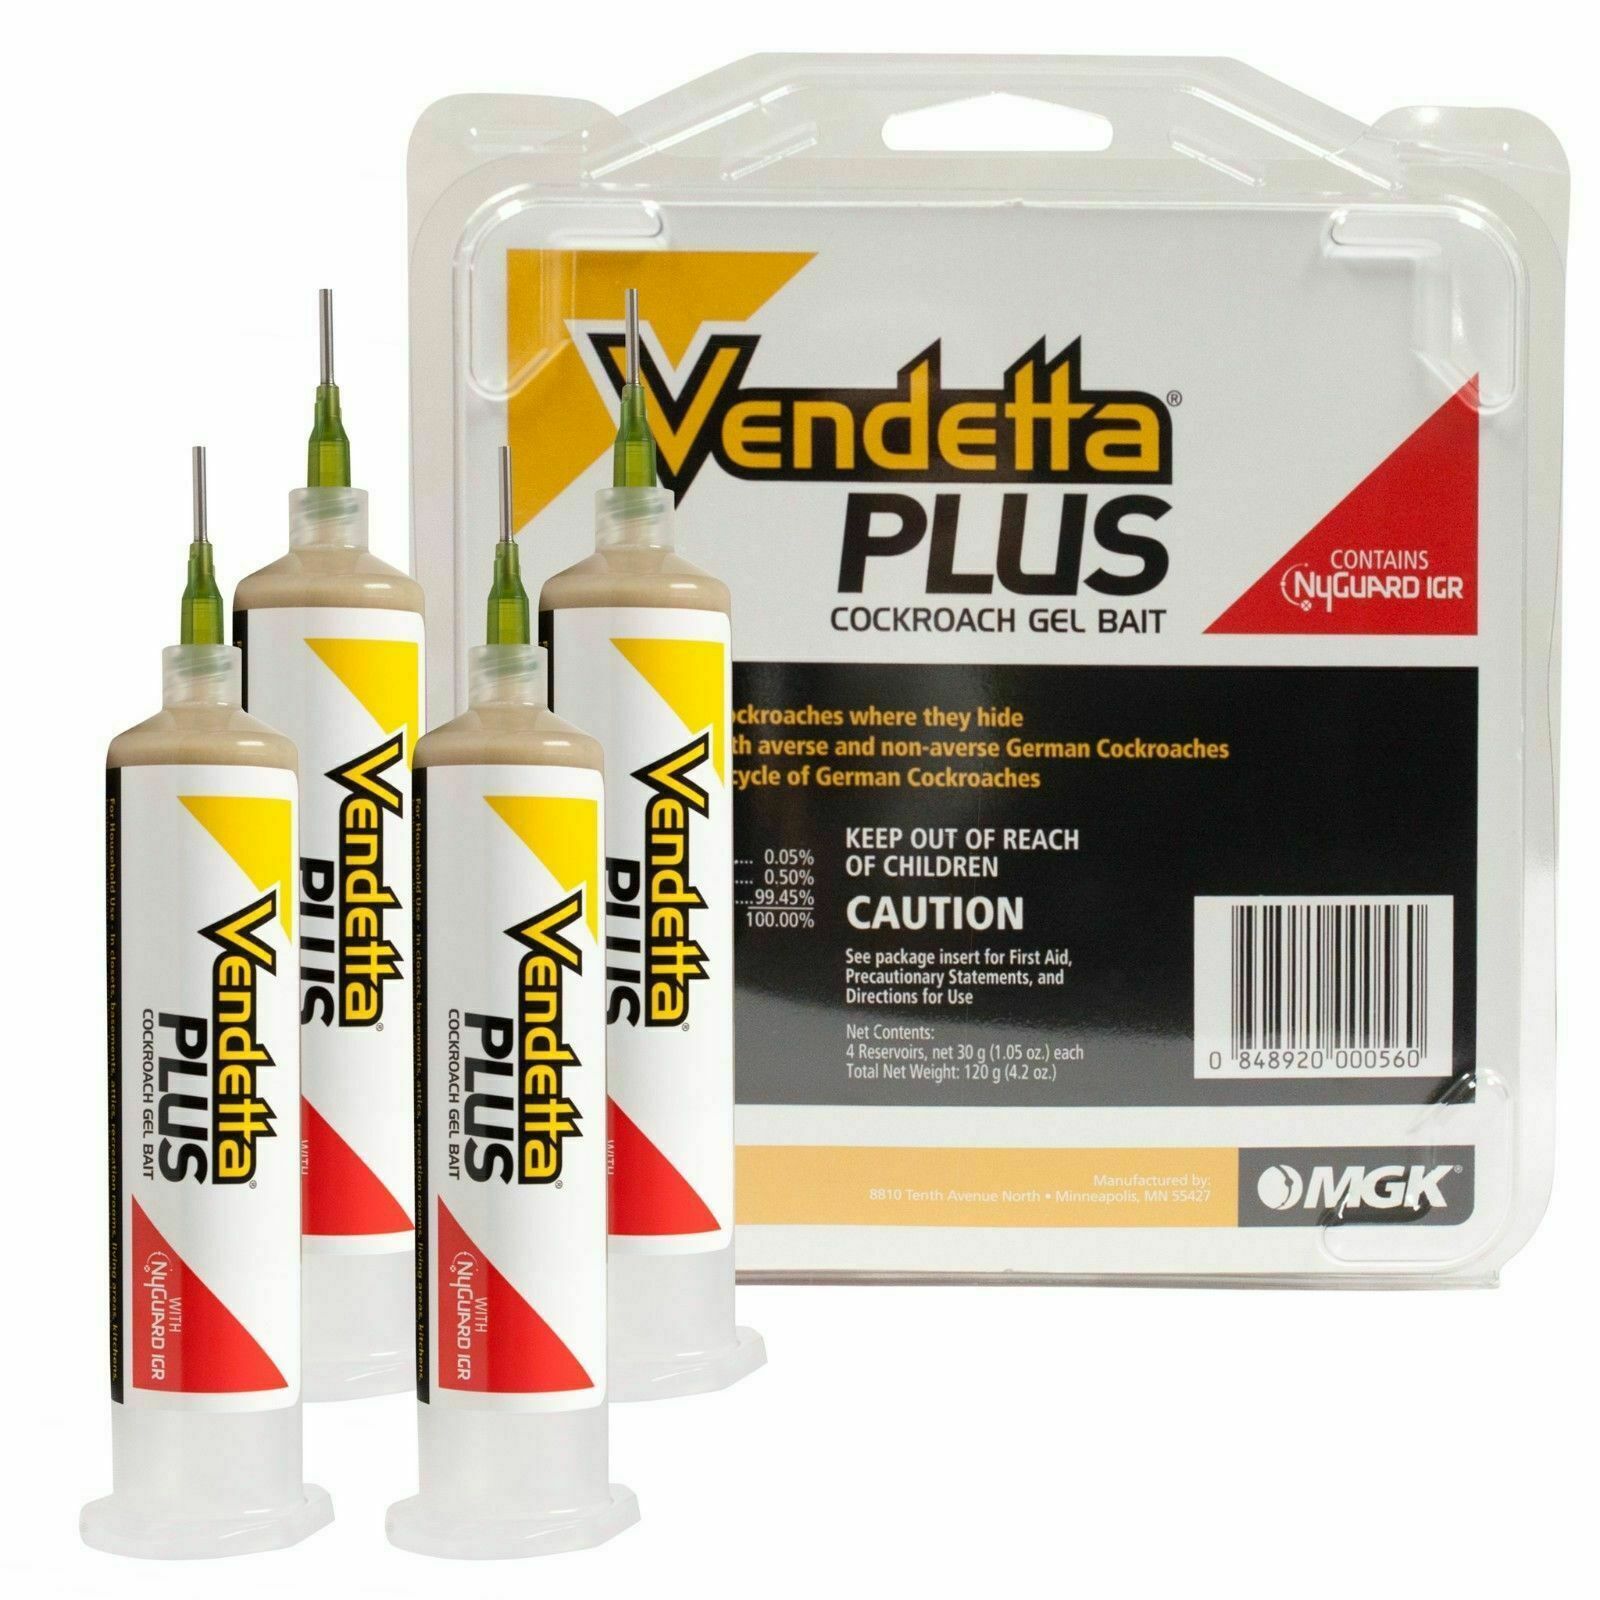 New Vendetta Plus Roach Killer / Cockroach Gel Bait- With Free Plunger And Tip!